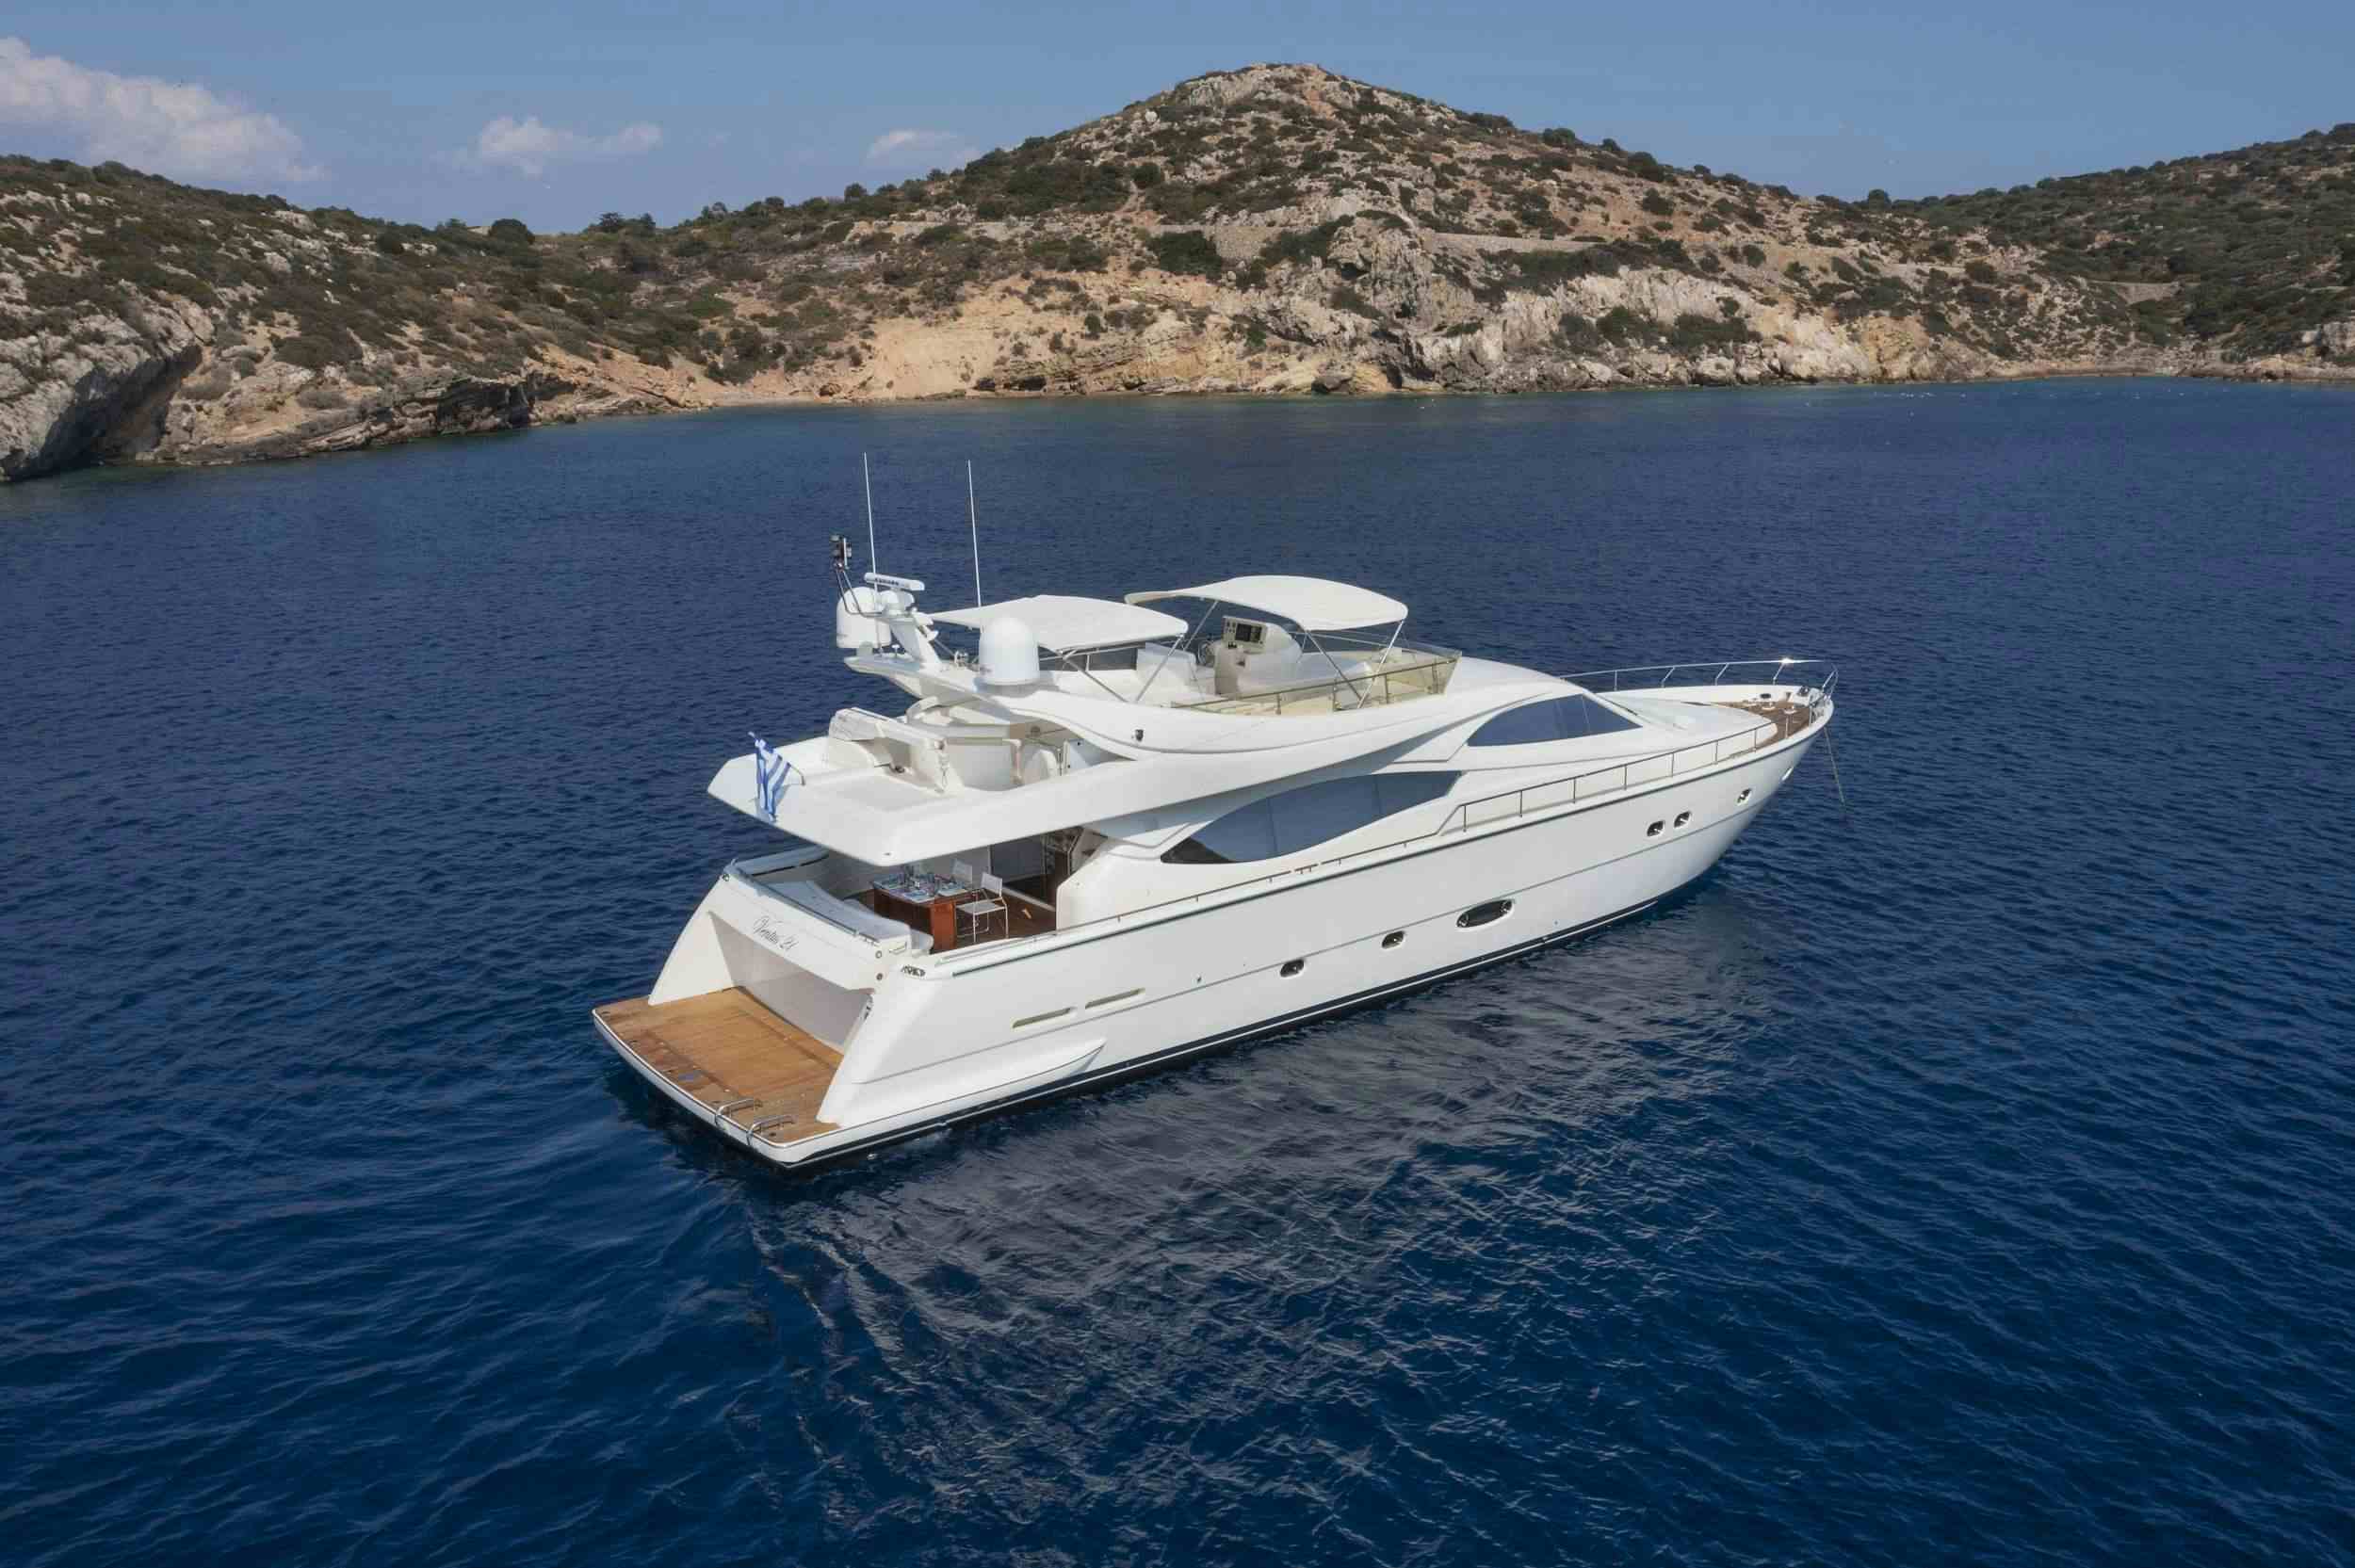 Ventus 21 - Yacht Charter Nafplion & Boat hire in Greece 1